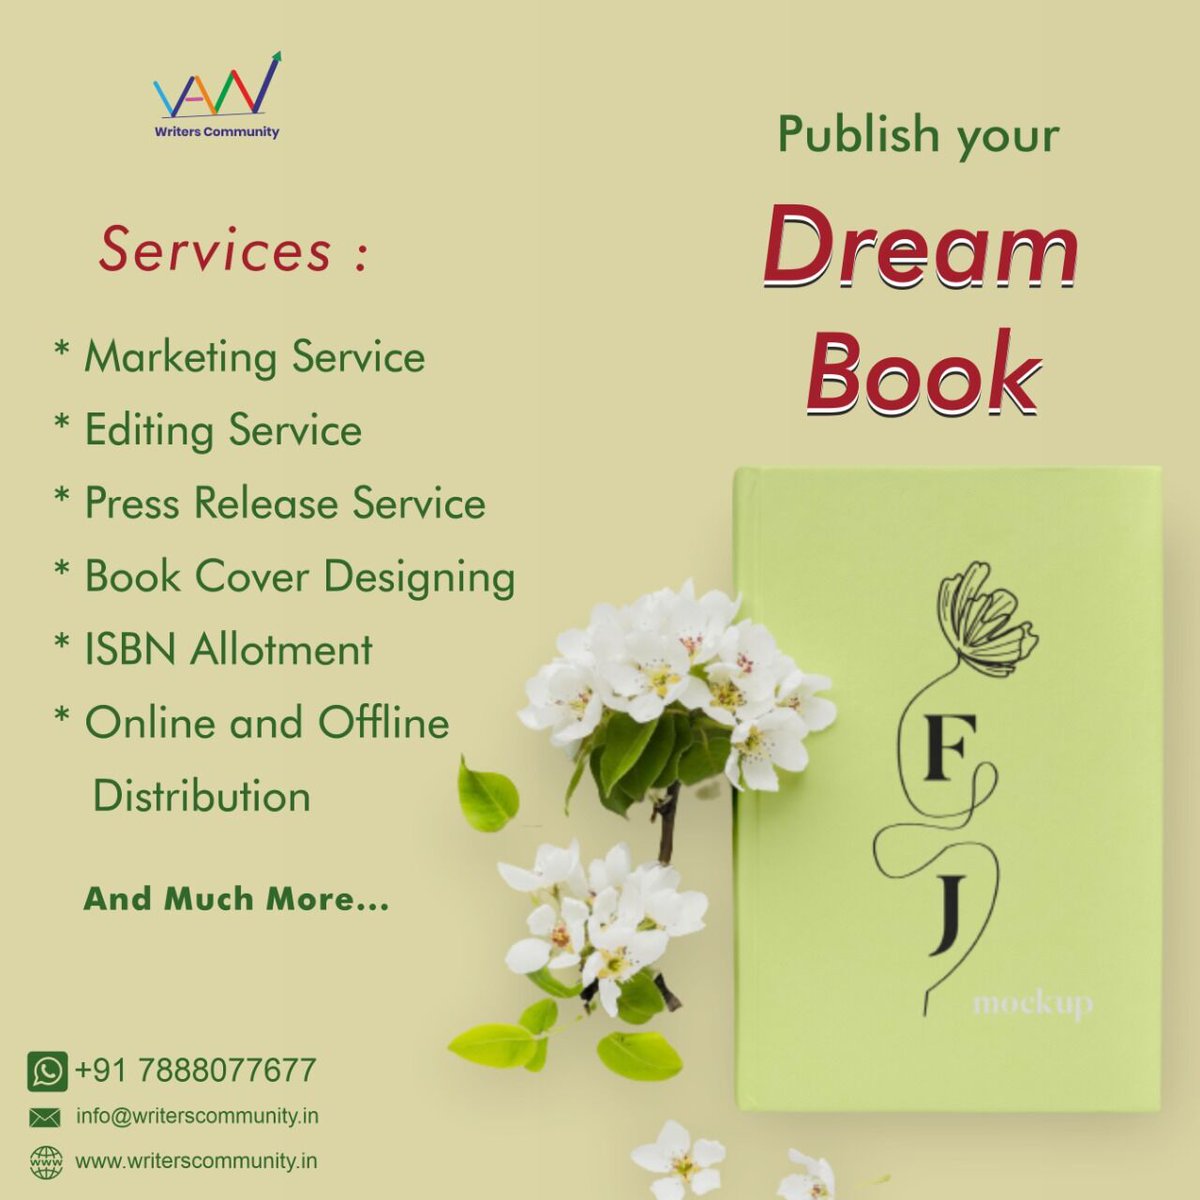 'Publish your Dream Book with this Services: ＊ Marketing Service ＊ Editing Service ＊ Press Release Service ＊ Book Cover Designing ＊ ISBN Allotment ＊Online and Offline Distribution' ⠀ Publish your Book with writerscommunity.in #Authors #WritersCommunity #SelfPublishing